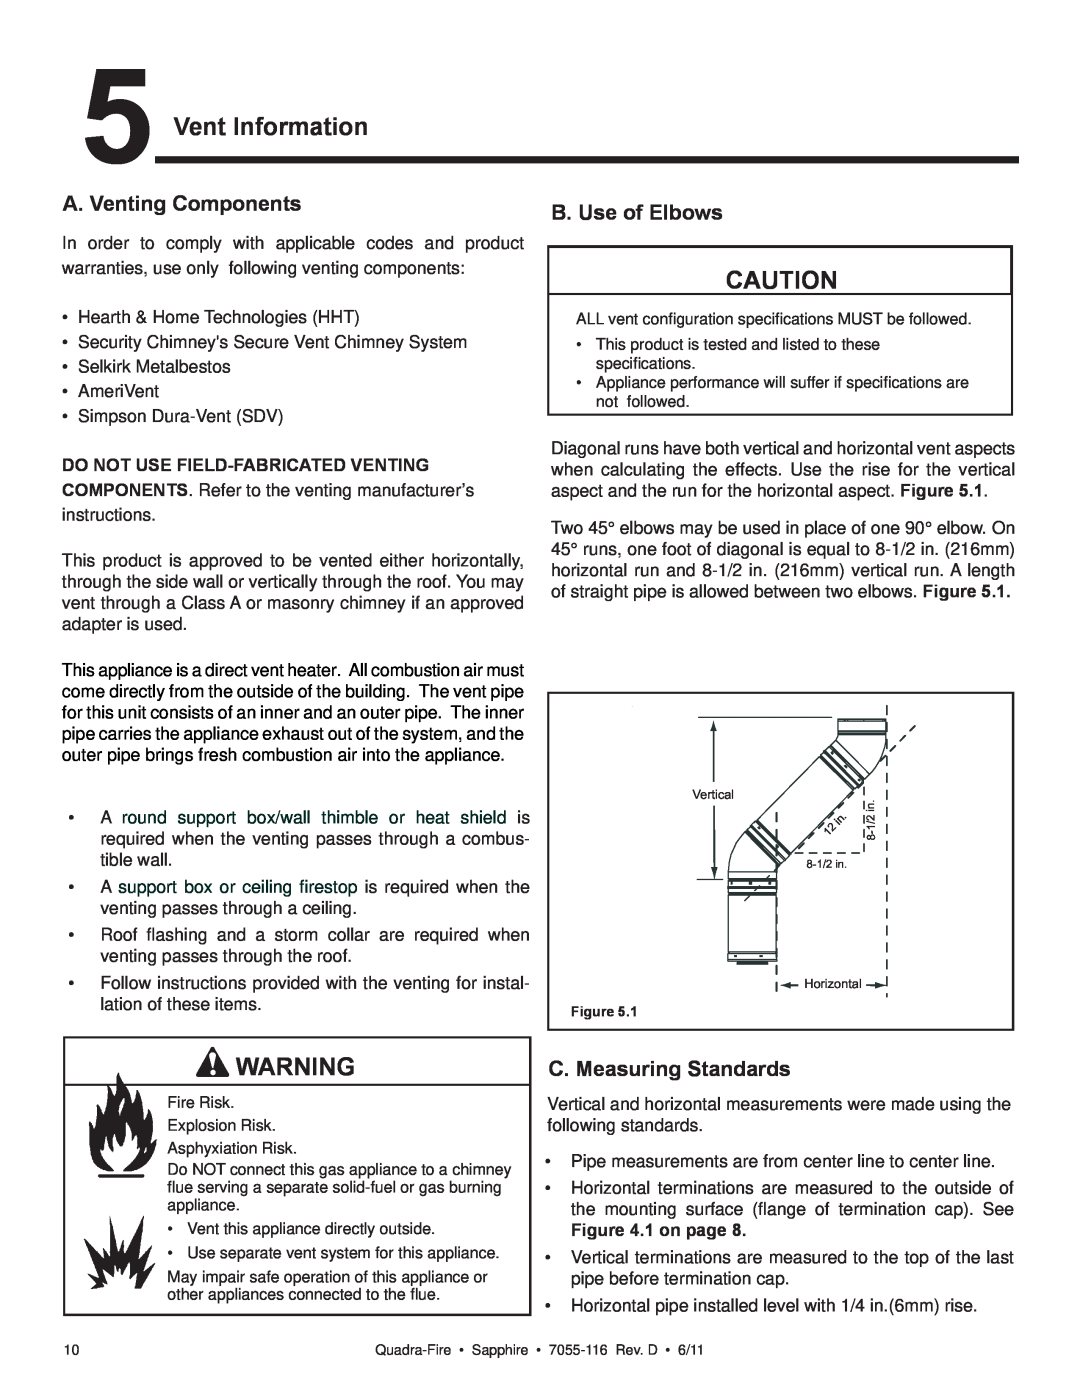 Quadra-Fire SAPPHIRE-D-PMH Vent Information, A. Venting Components, B. Use of Elbows, C. Measuring Standards, 1 on page 